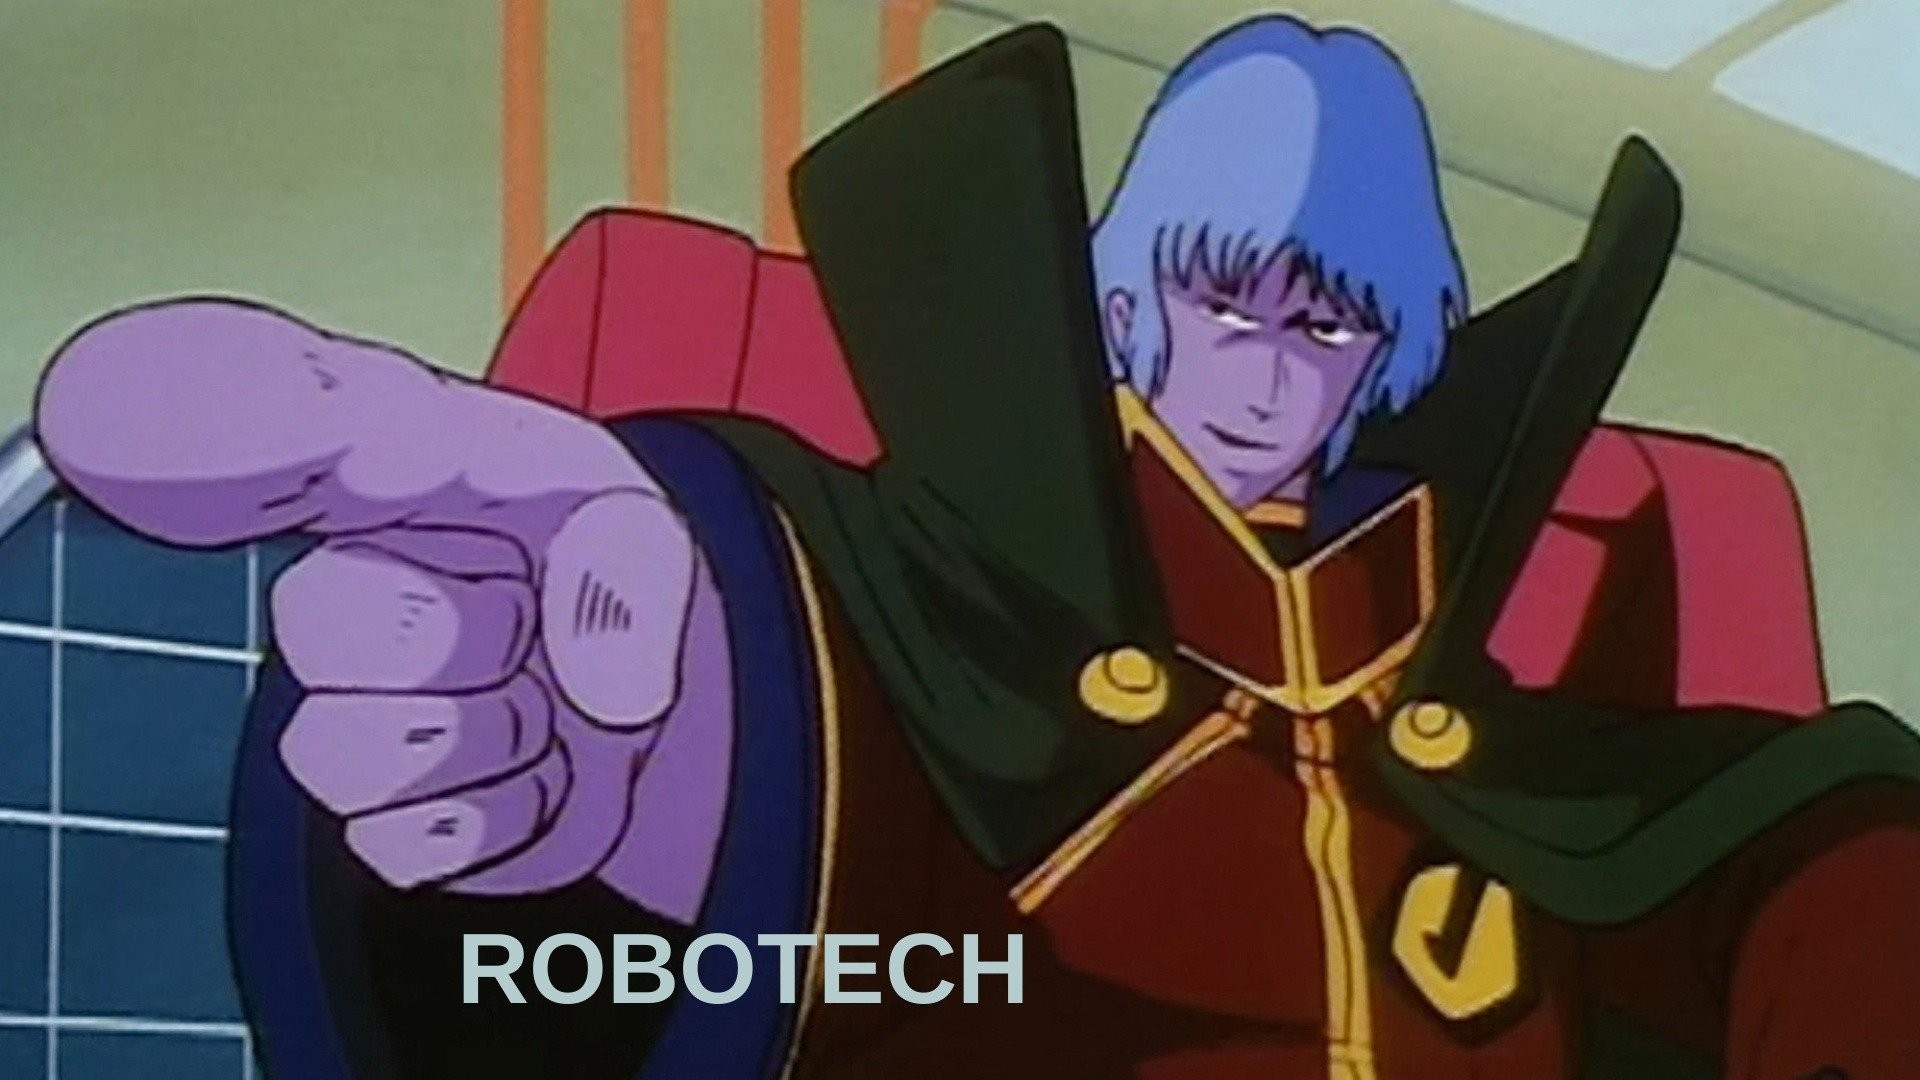 Robotech Debuts First Issue Cover and Minmei Character Design Art